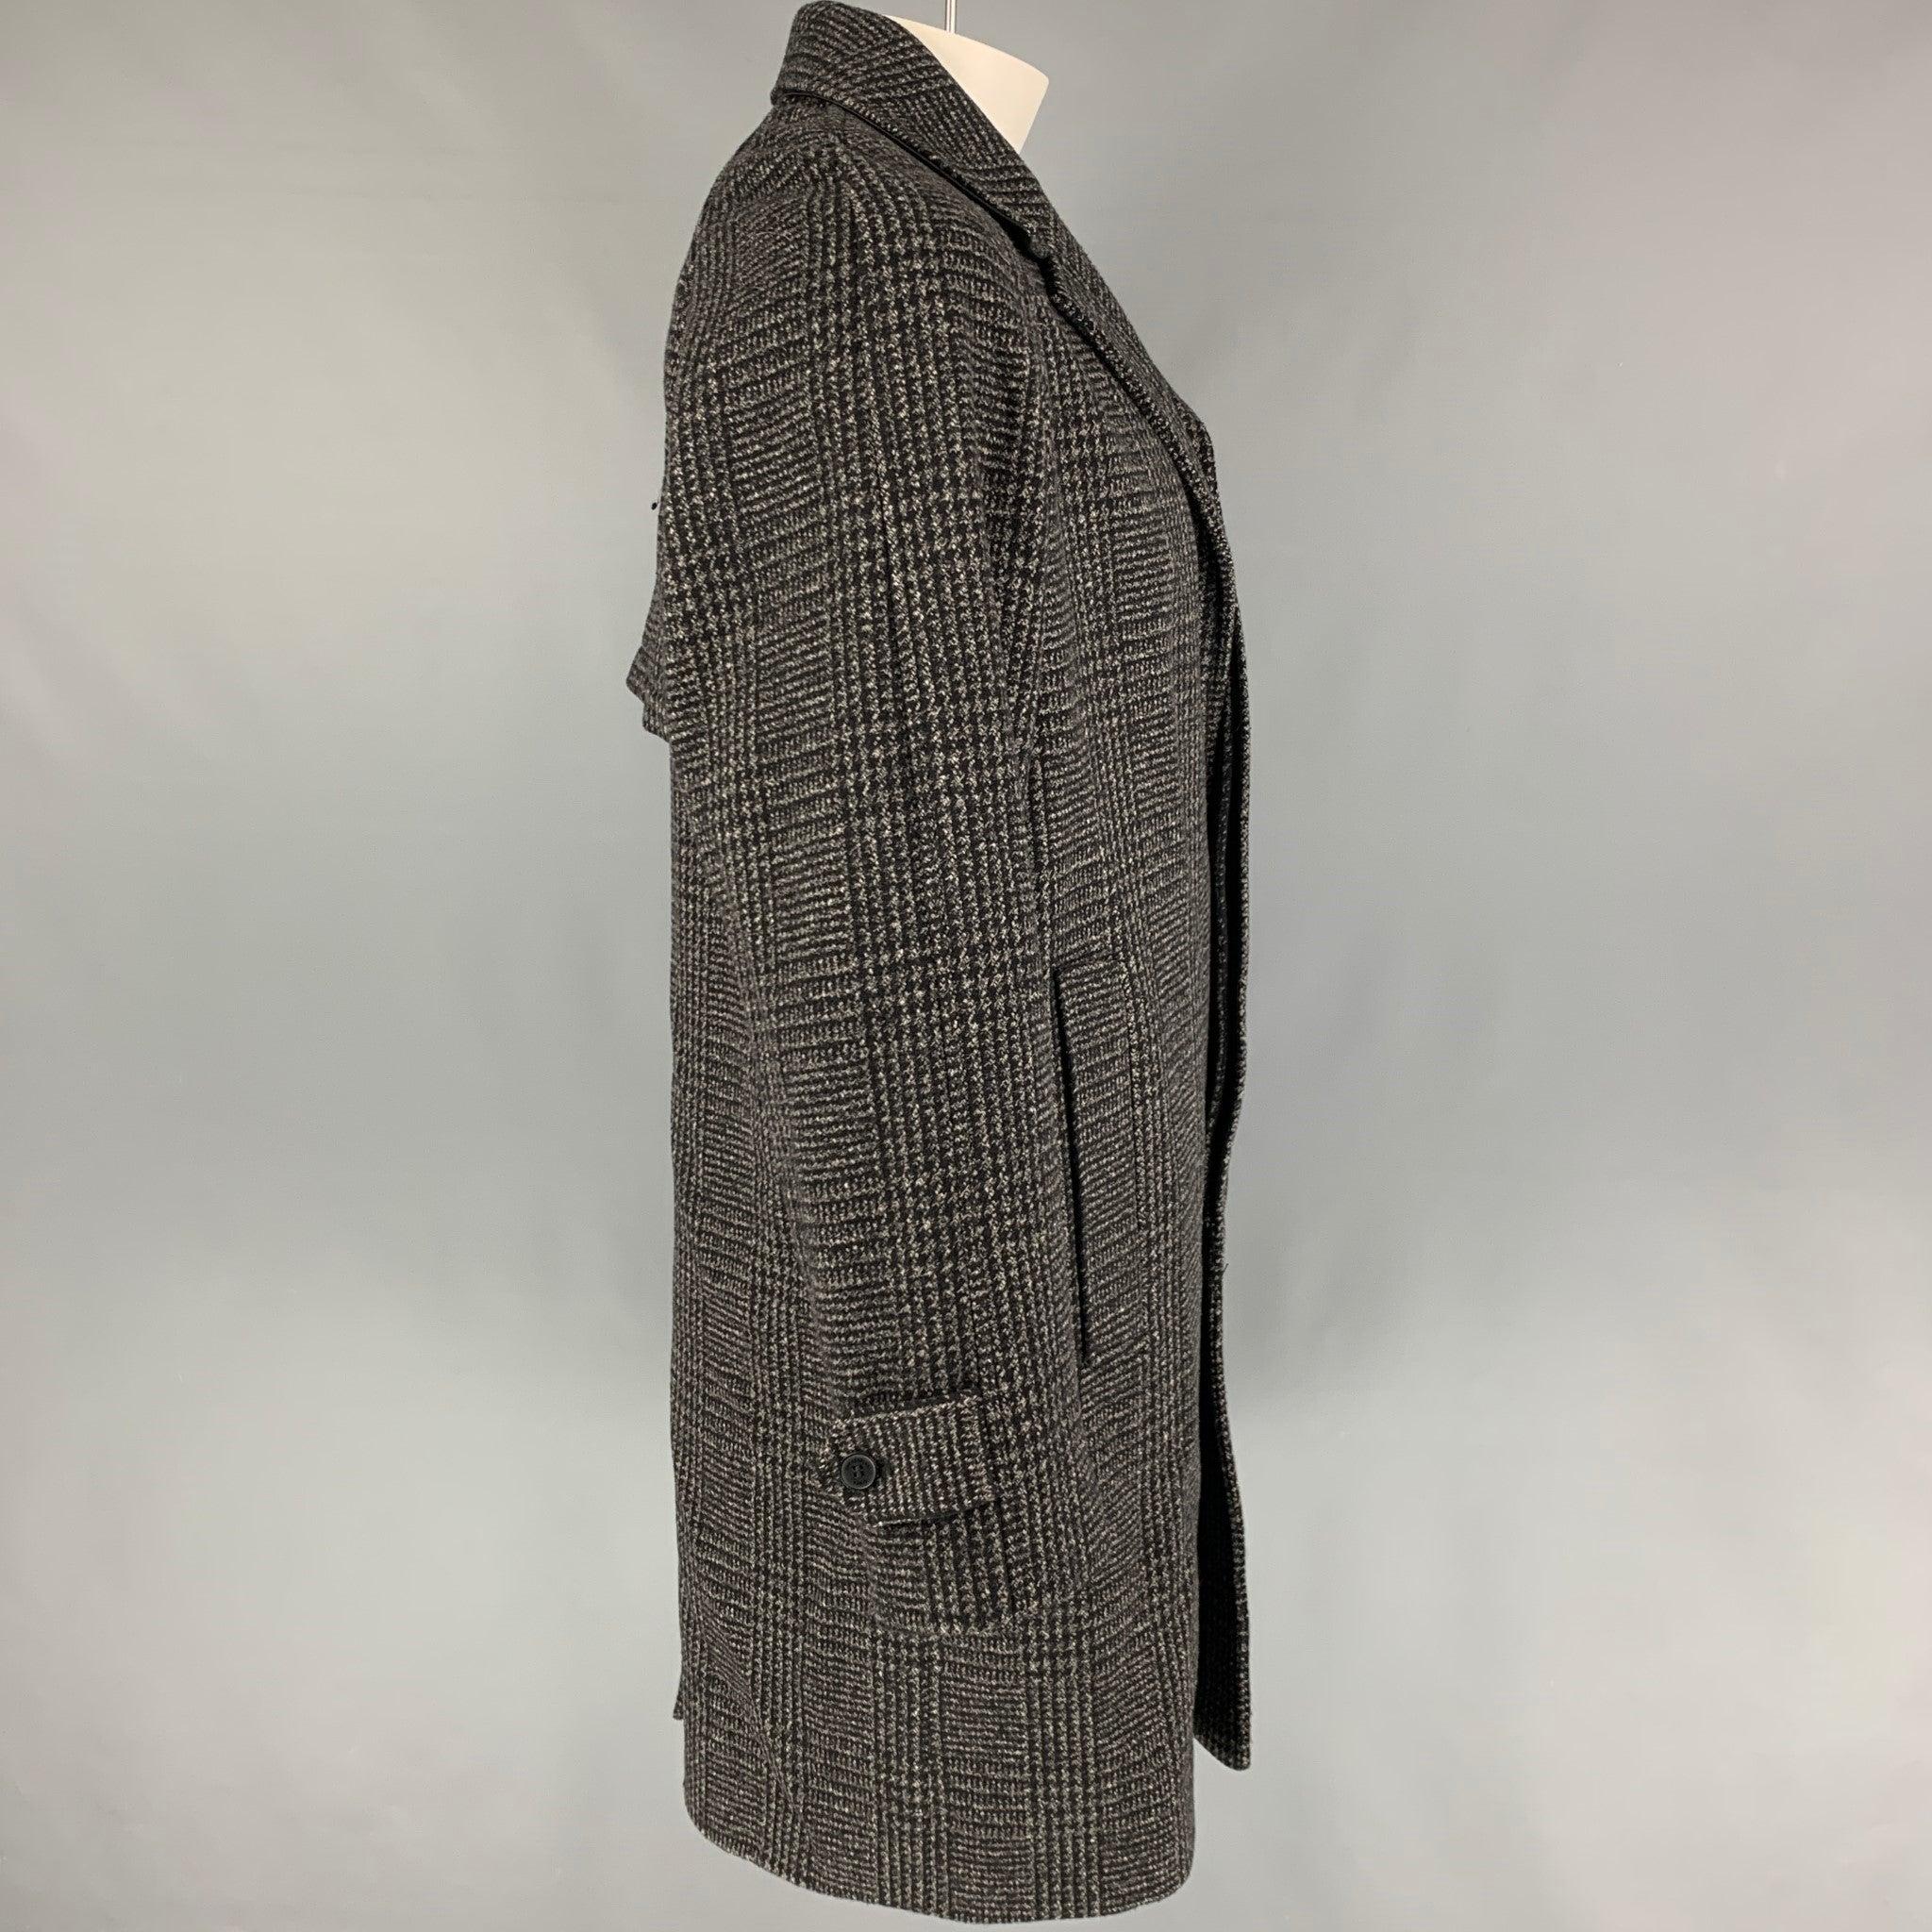 THE KOOPLES coat comes in a grey & black plaid wool featuring a notch lapel, slit pockets, single back vent, and a hidden placket closure.
Very Good
Pre-Owned Condition. 

Marked:   XL  

Measurements: 
 
Shoulder: 18.5 inches Chest: 49 inches